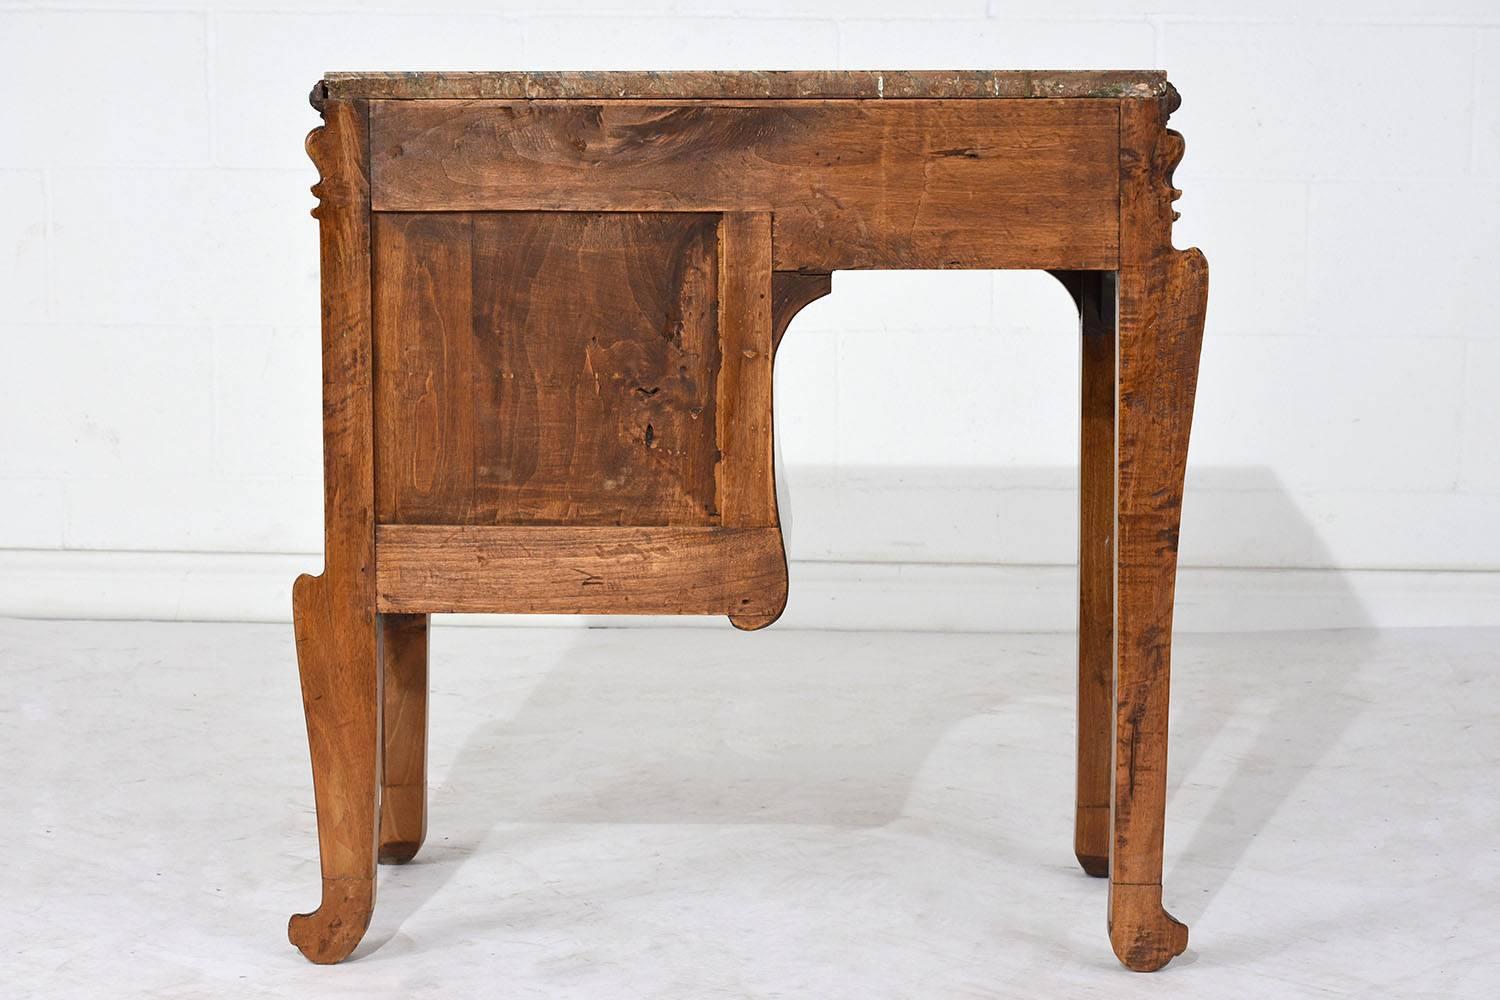 Early 20th Century Art Nouveau Nightstand in the Manner of Louis Majorelle 1